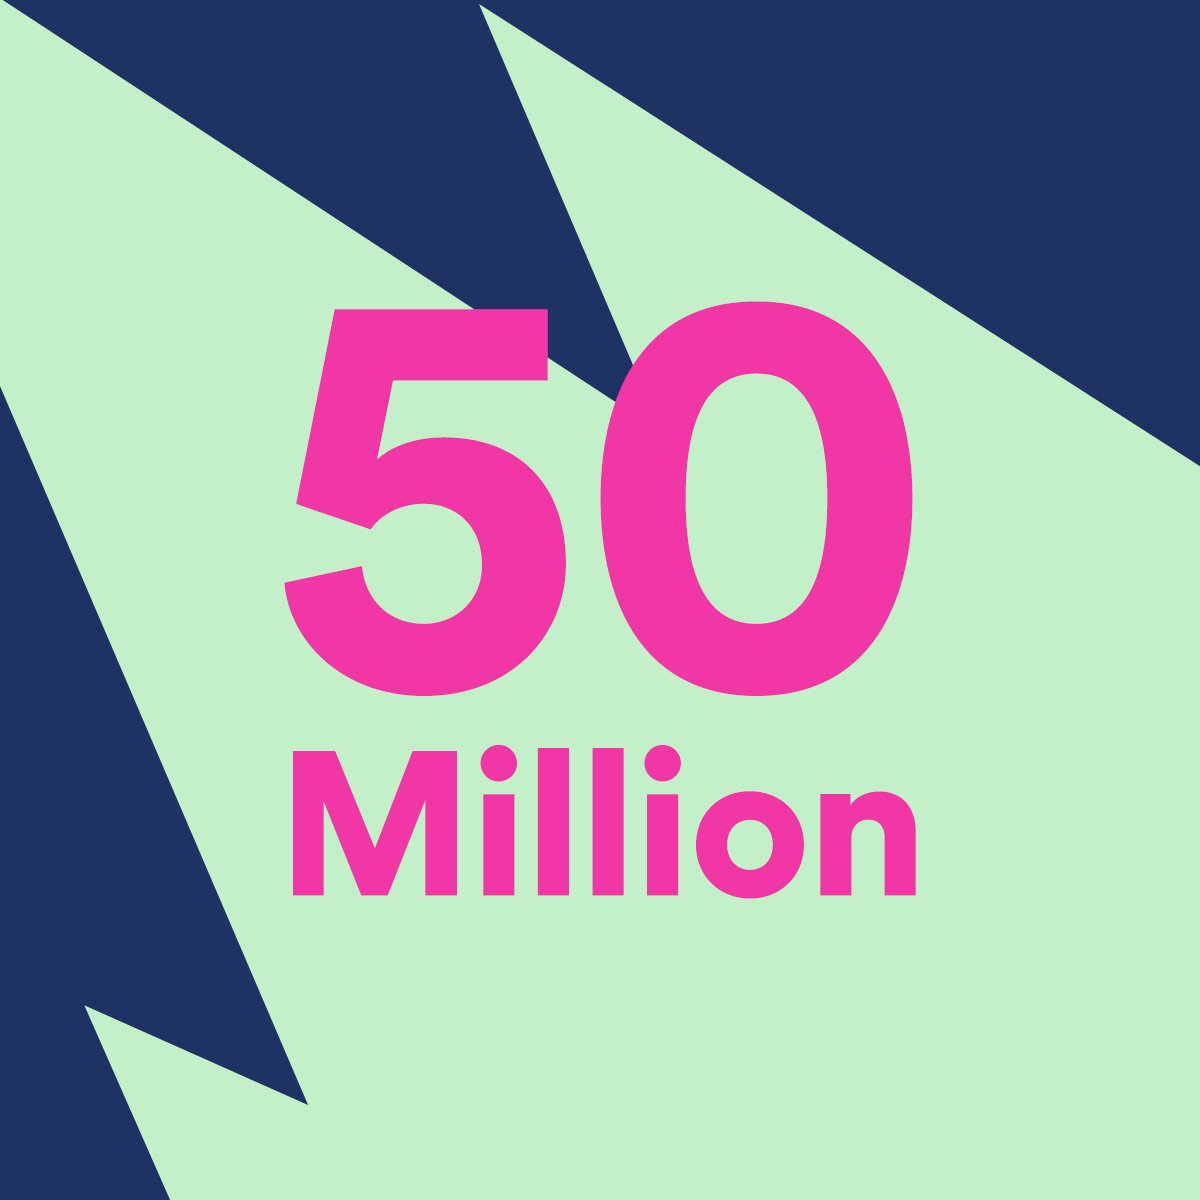 RT @Spotify: Thank you to our 50 million subscribers. #Spotify50 https://t.co/eXkOV71bwu